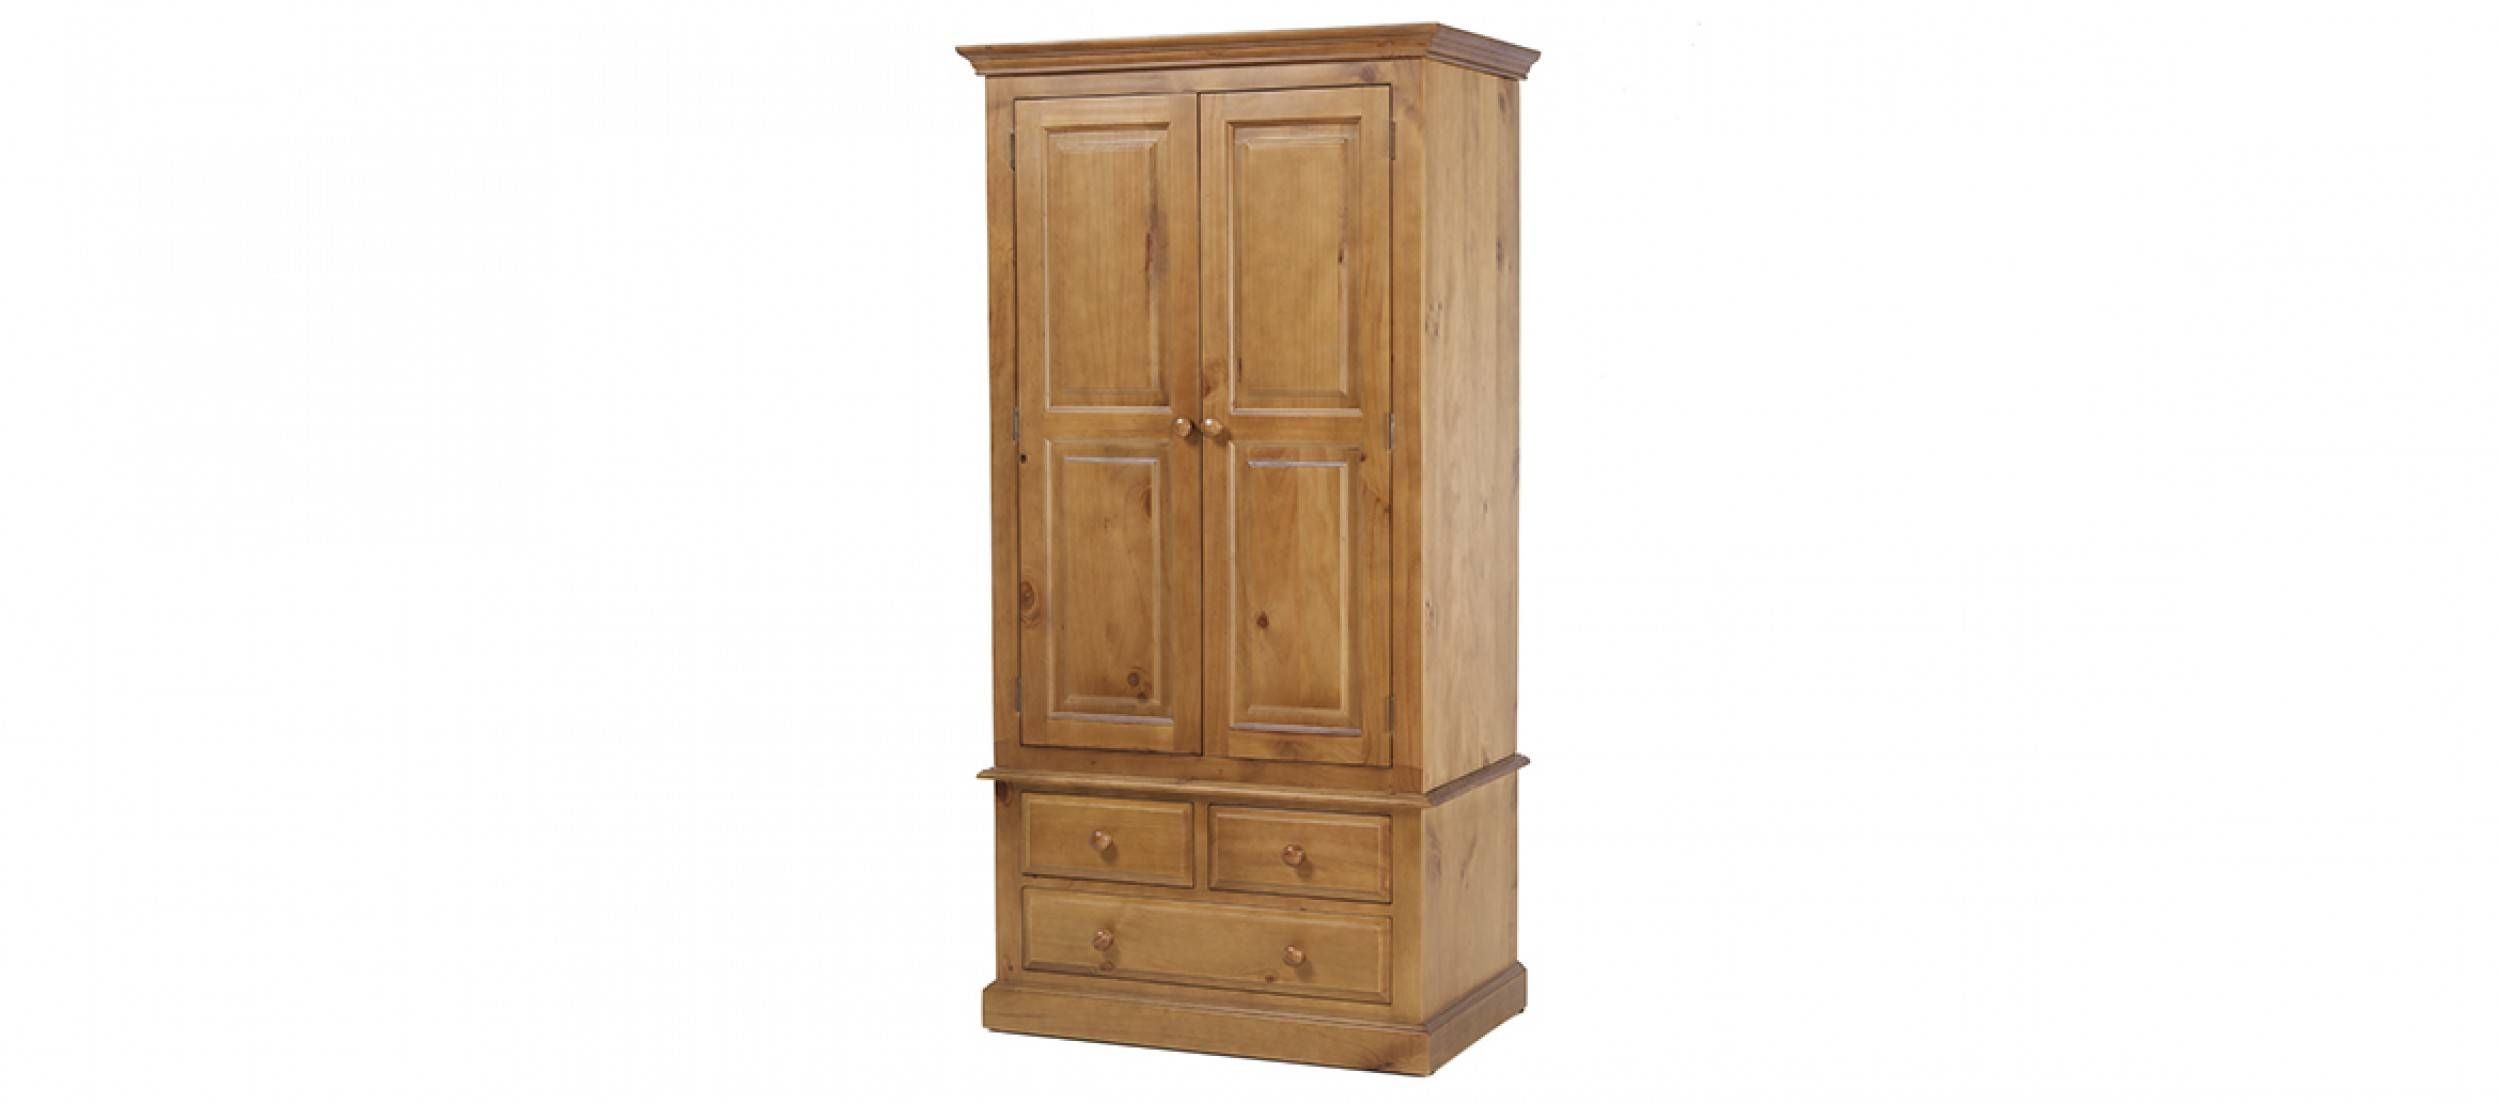 Essentials Pine Gents Double Wardrobe | Quercus Living Inside Pine Double Wardrobes (View 12 of 15)